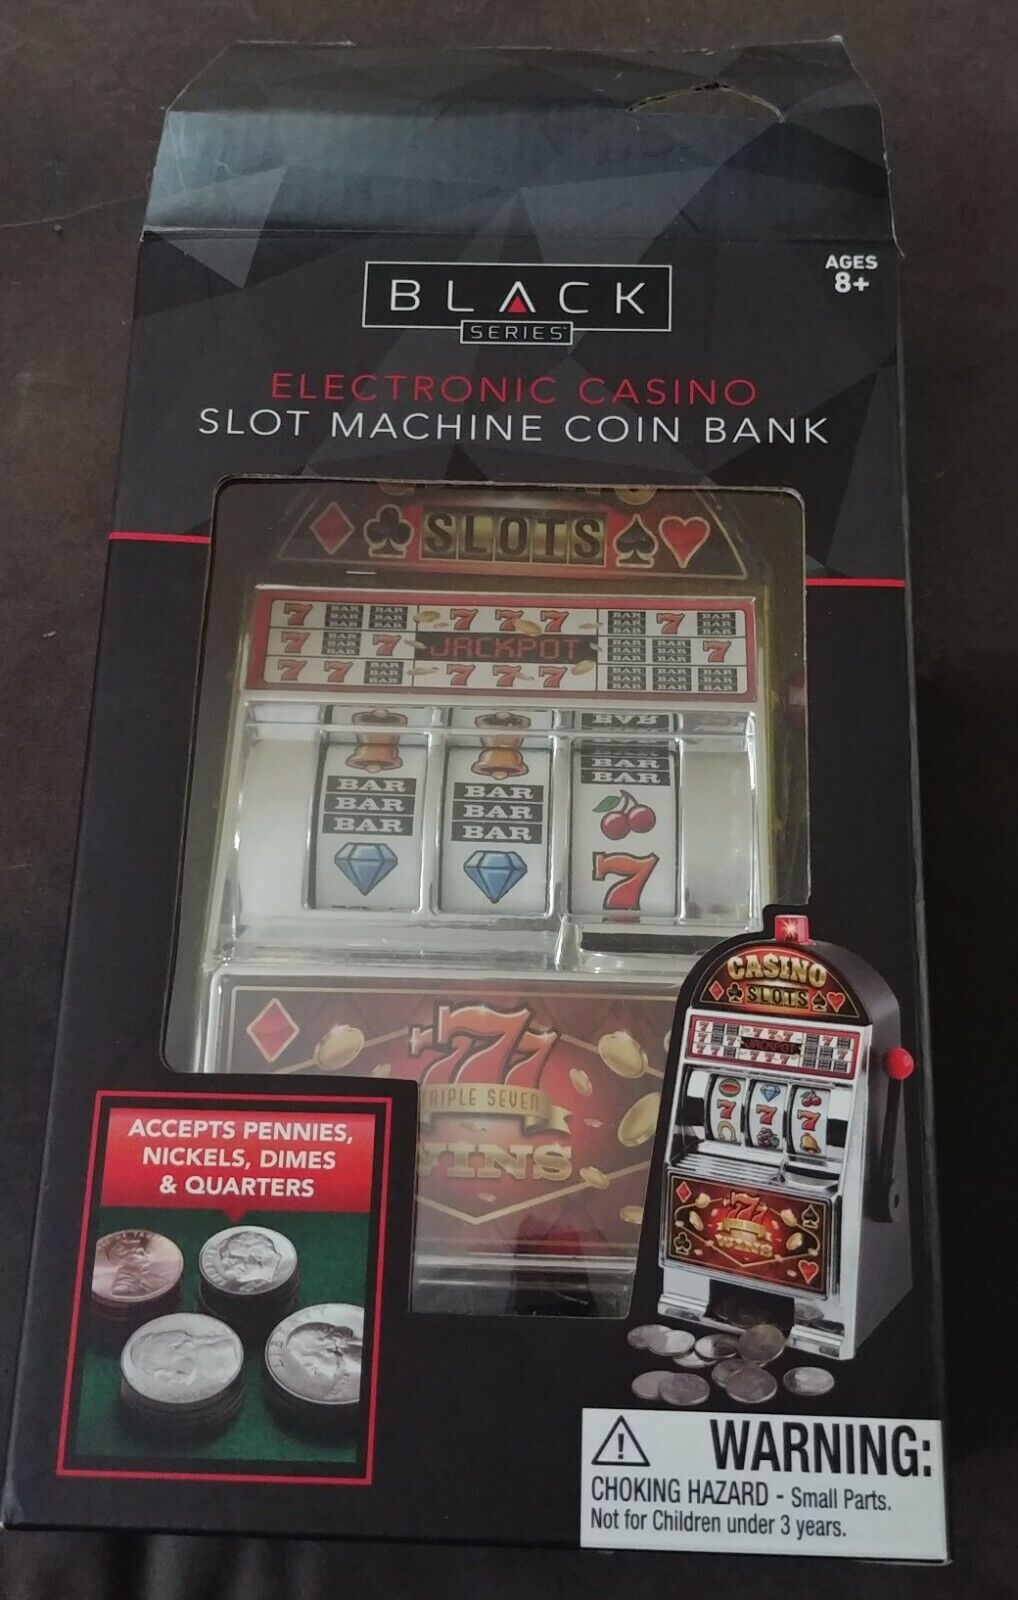 Electronic Casino Slot Machine Coin Bank by Black Series